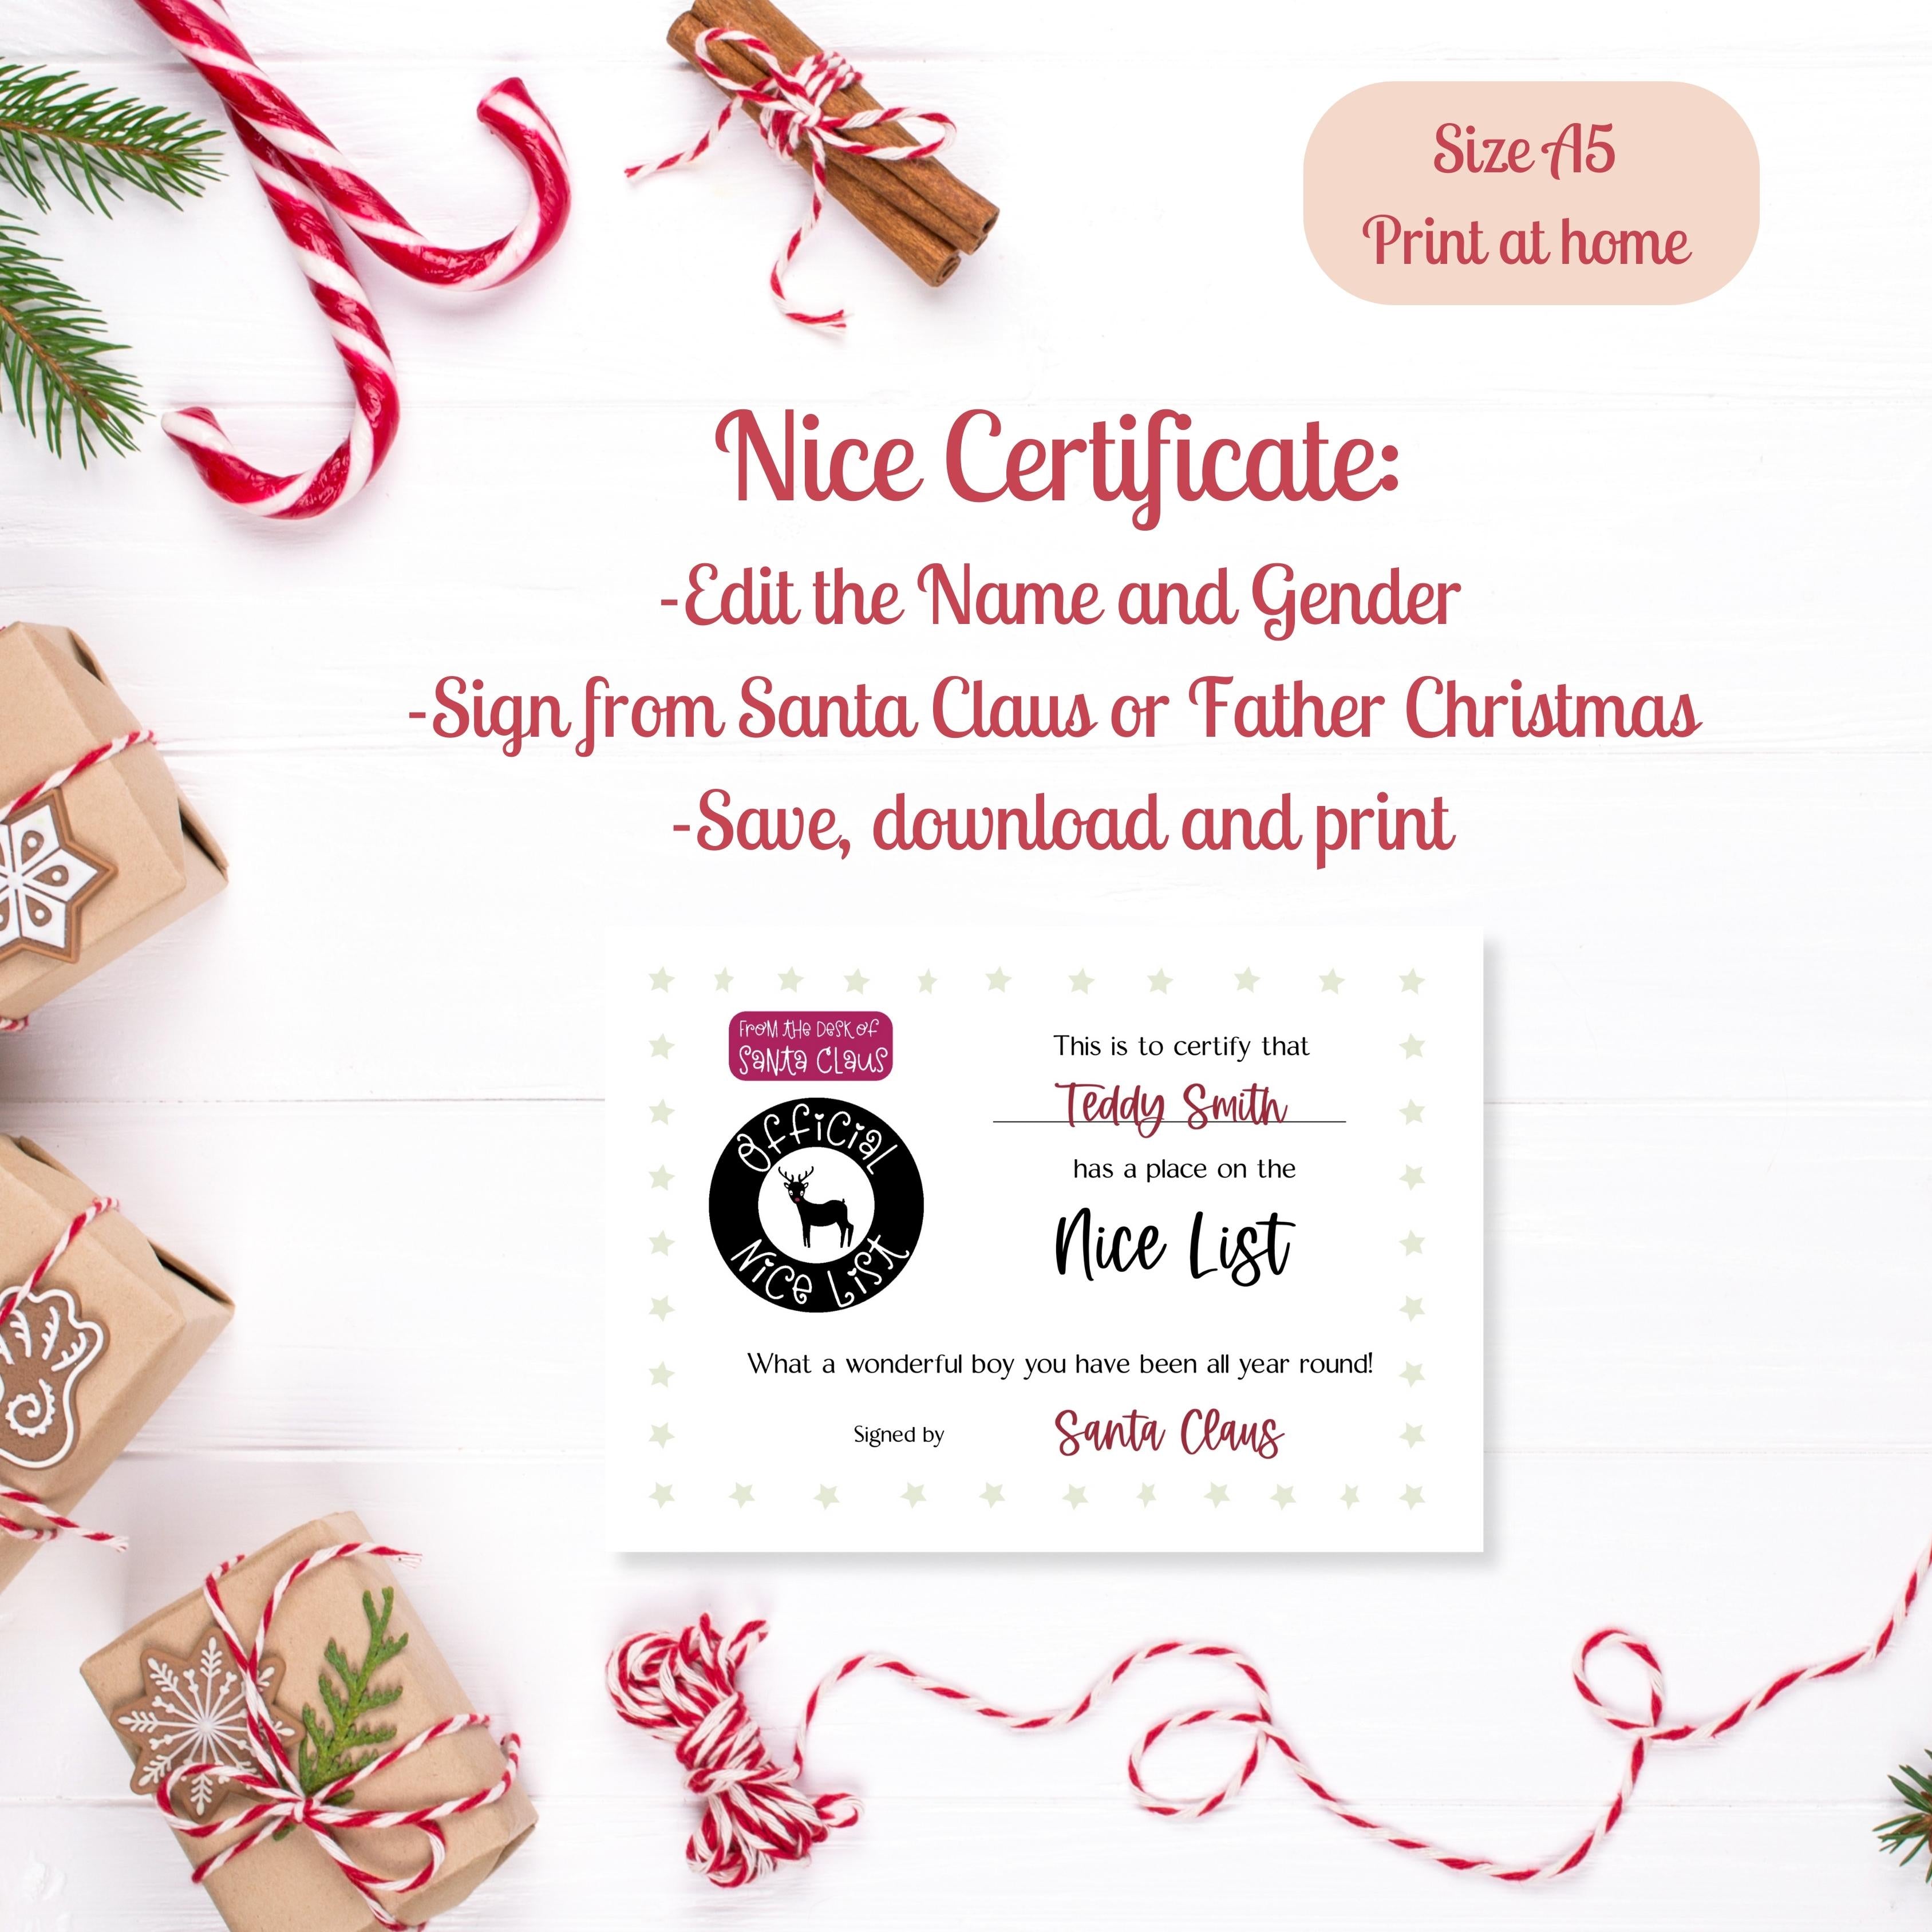 Editable Digital Christmas Letter from Santa with Customisable Nice List Certificate